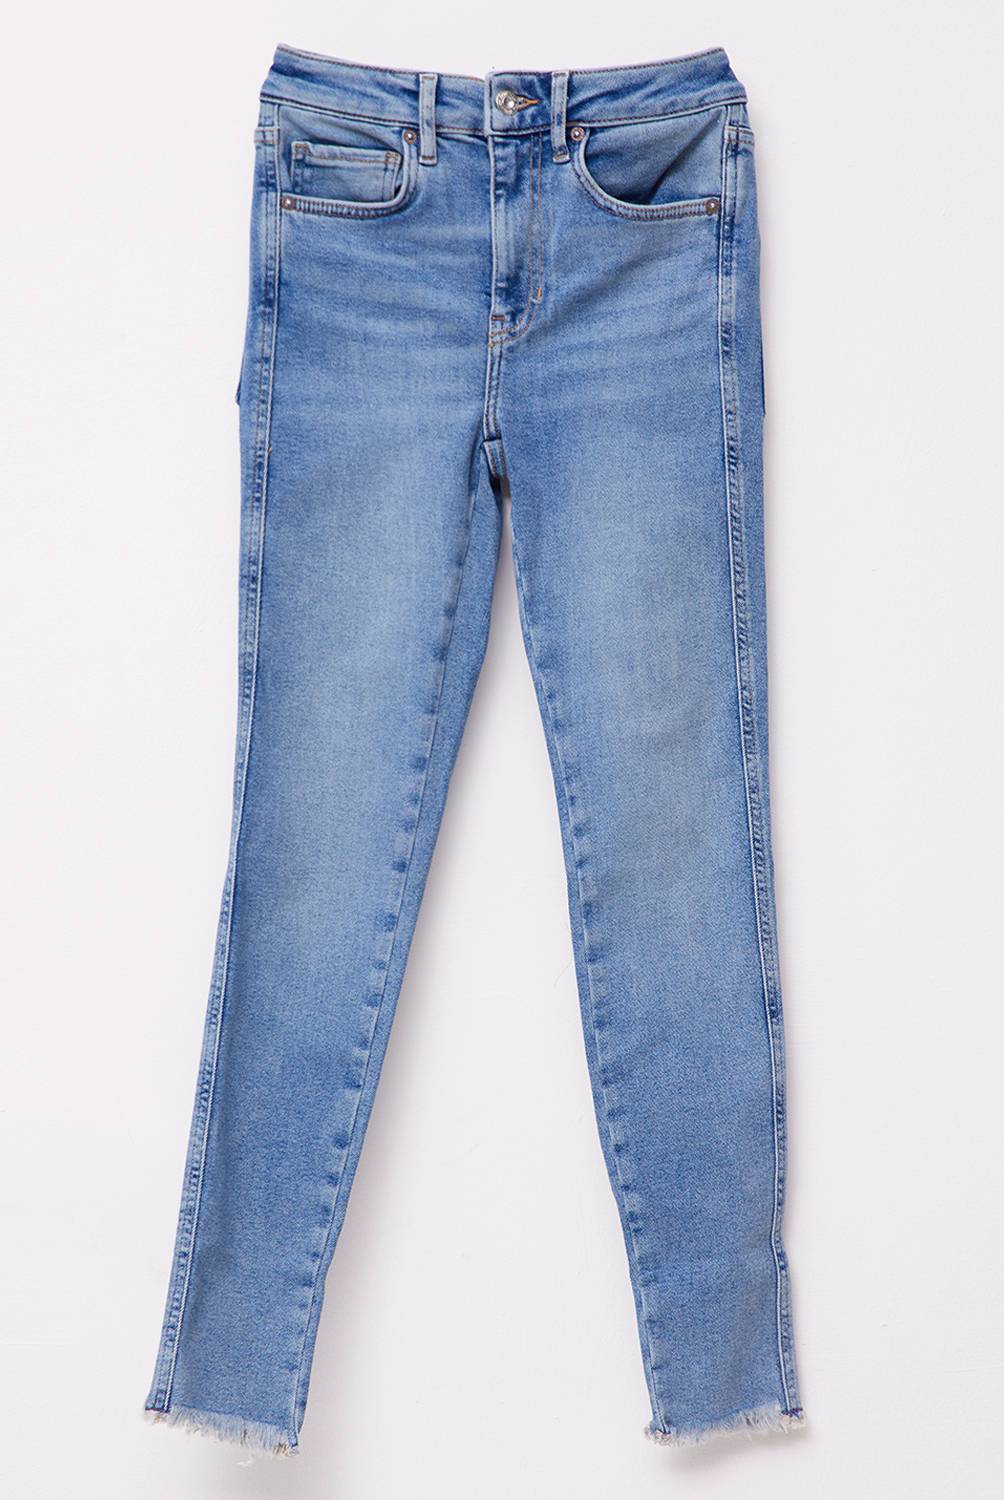 FREE PEOPLE - Free People Jeans Skinny High Rise Mujer